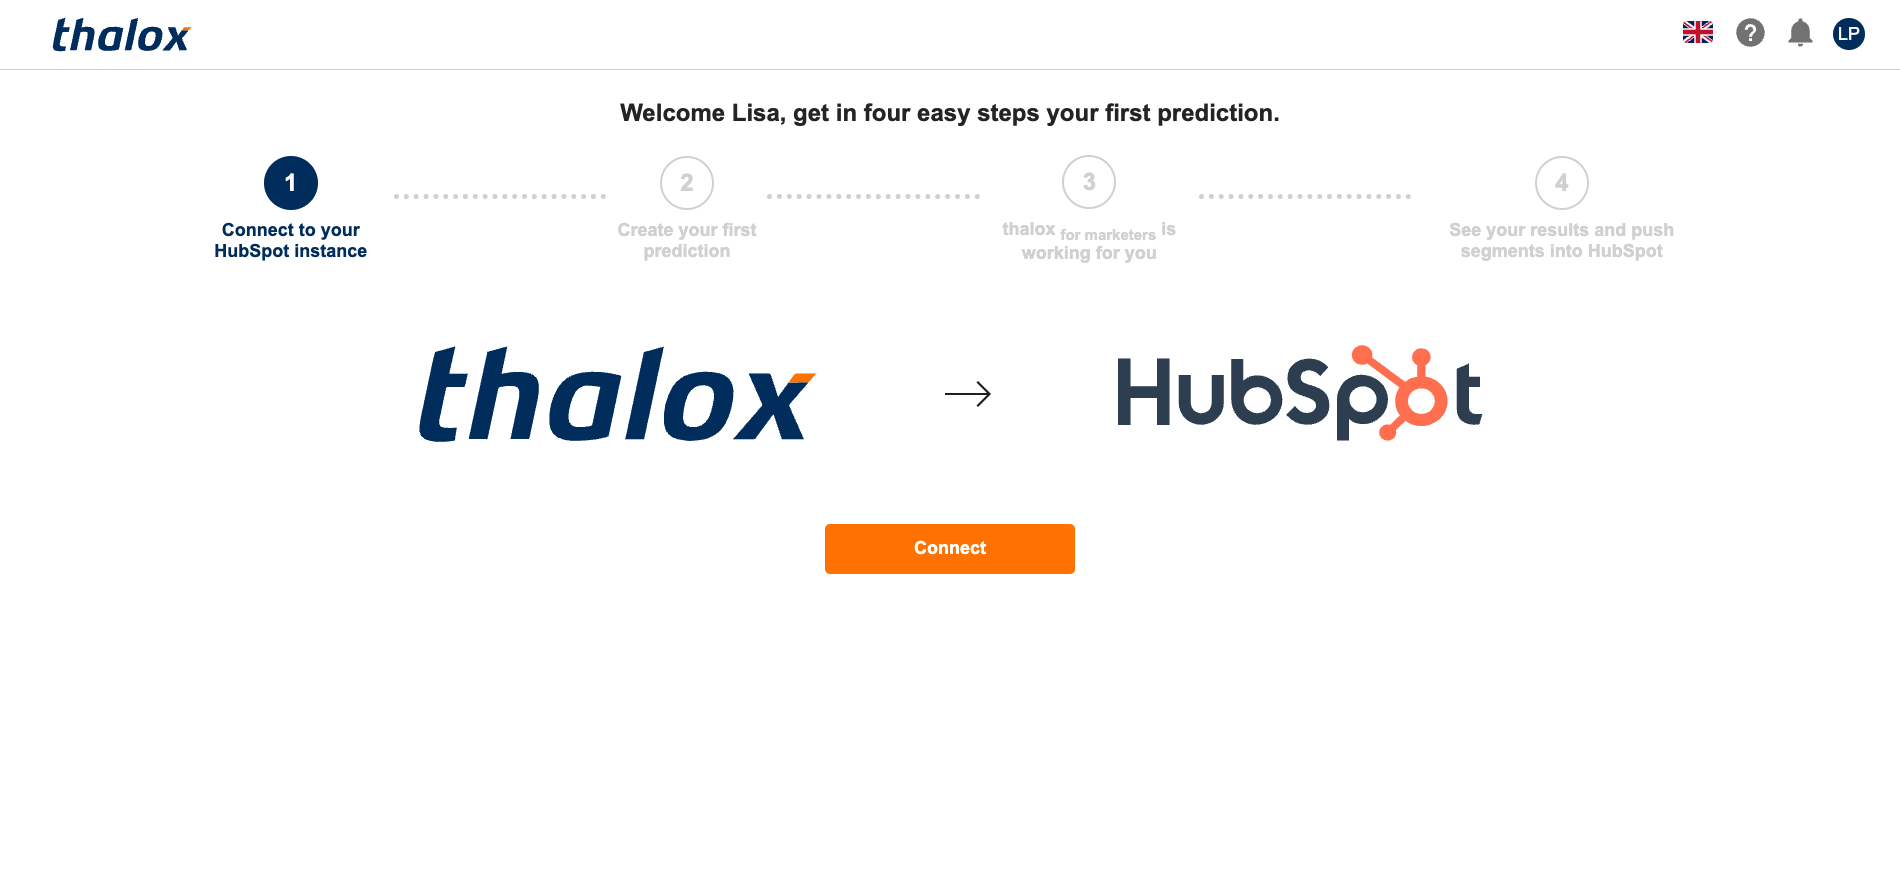 Step 1: Connect to your HubSpot Marketing instance